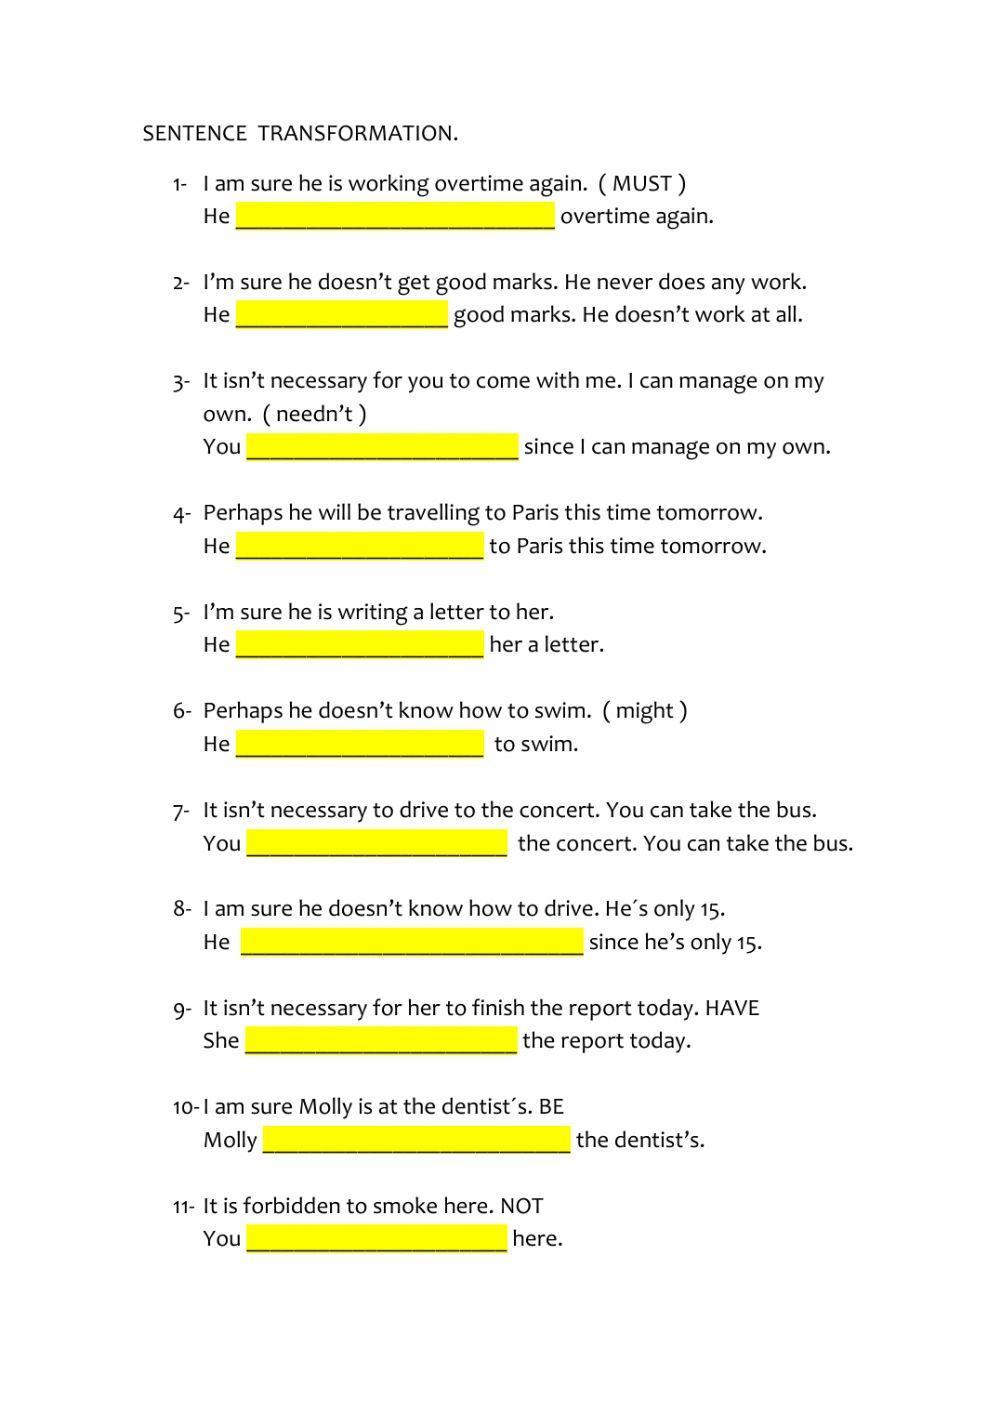 Sentence transformation interactive exercise | Live Worksheets